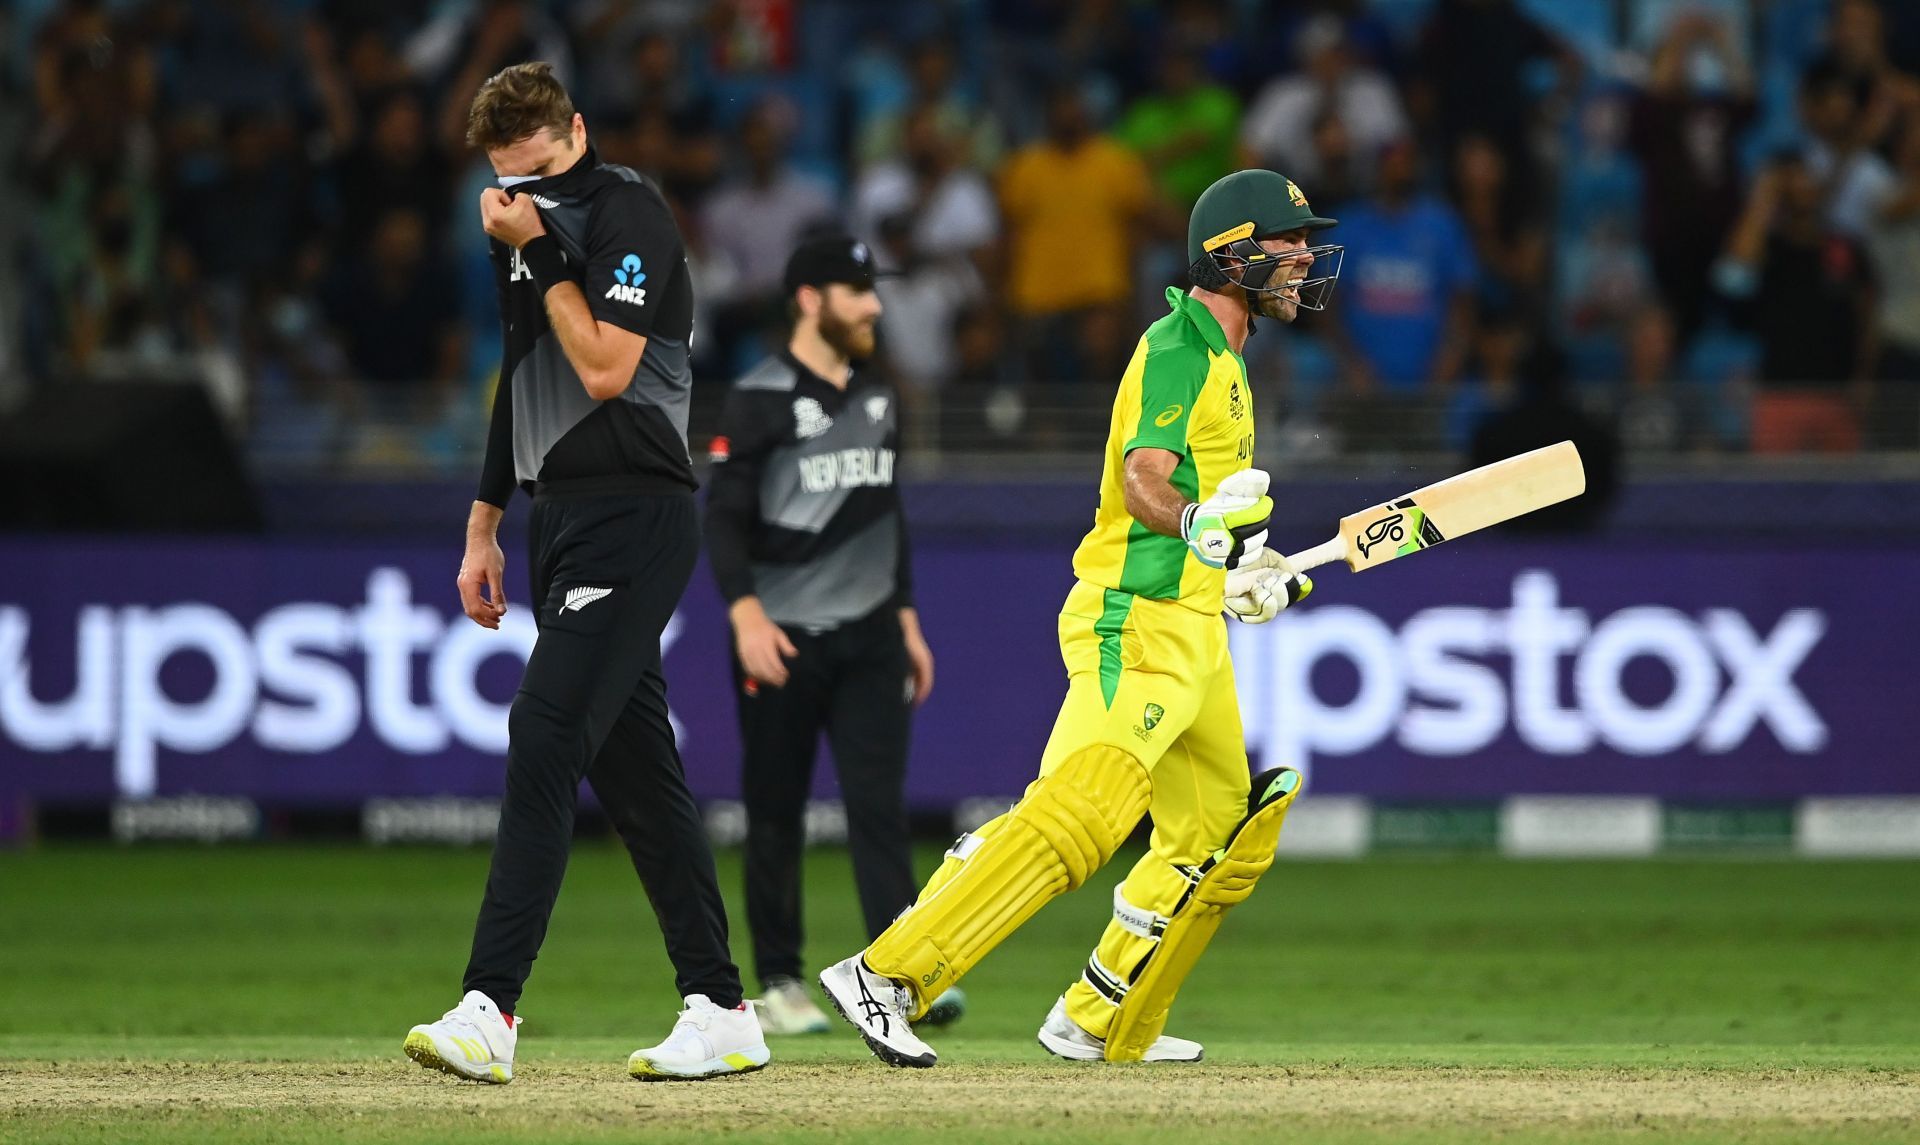 Glenn Maxwell celebrates while Tim Southee is dejected after Australia&rsquo;s T20 World Cup triumph. Pic: Getty Images